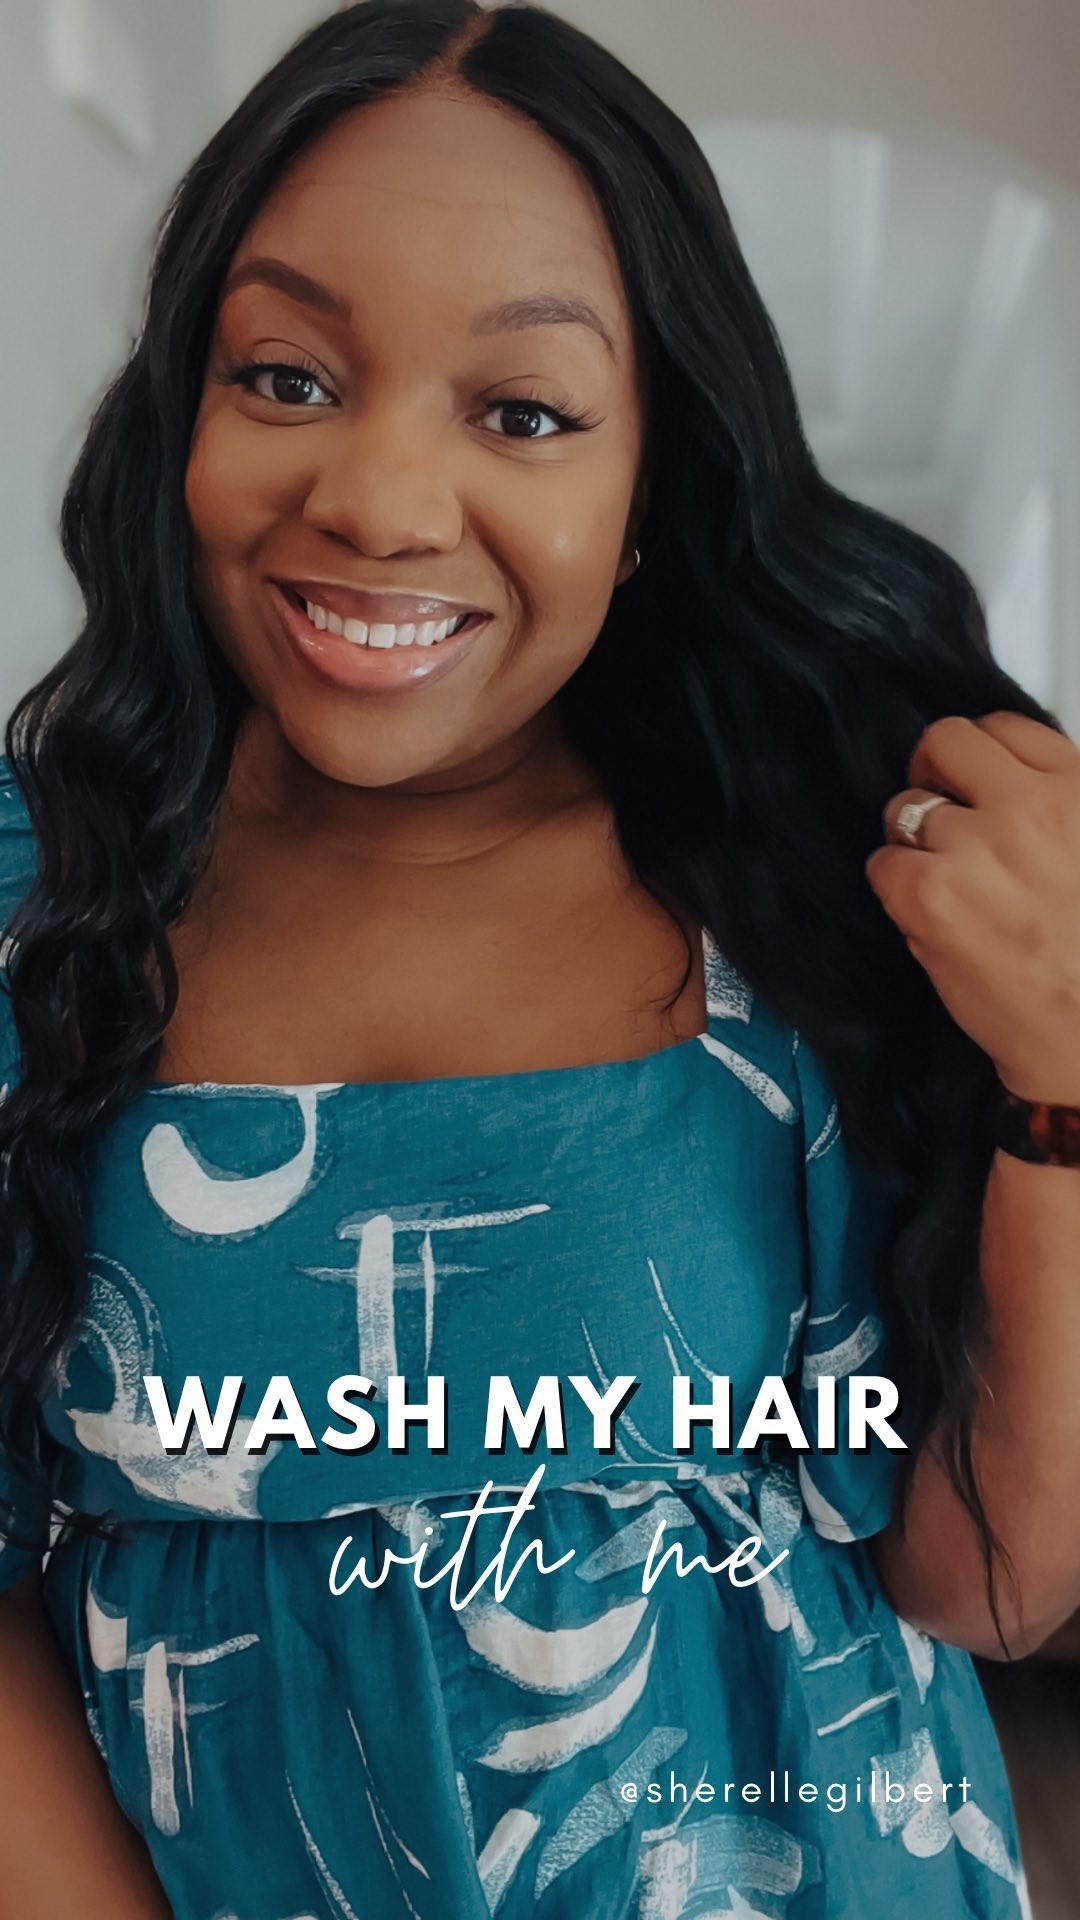 I did my hair a couple weeks ago and meant to share this sooner 🤦🏽‍♀️ In 2023 we are sharing the content no matter when it was recorded, so get into it! 

This is my wash routine fearing @canvasbeautybrand products. These products have done wonders for my hair! The growth has been real and it’s all thanks to the full bloom line and the hair growth serum. 

What are your current go-to hair products? Let me know in the comments ⬇️
•
•
•
#naturalhair #washday #canvasbeauty #canvasbeautybrand #huntsvilleinfluencer